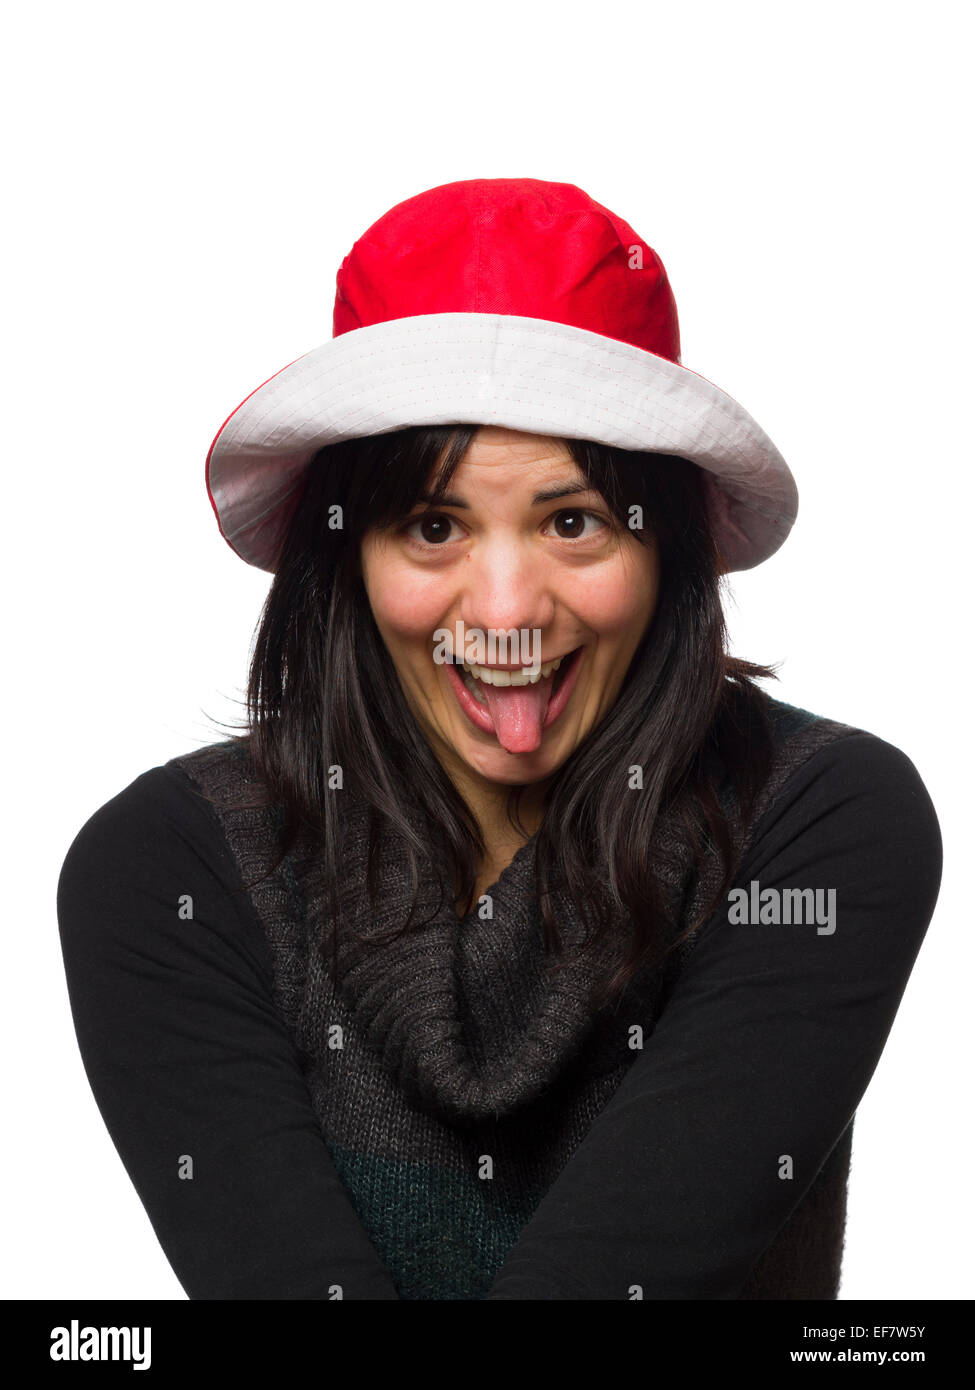 Goofy portrait of a woman doing goofy faces with her tongue out wearing a red hat isolated on white background Stock Photo